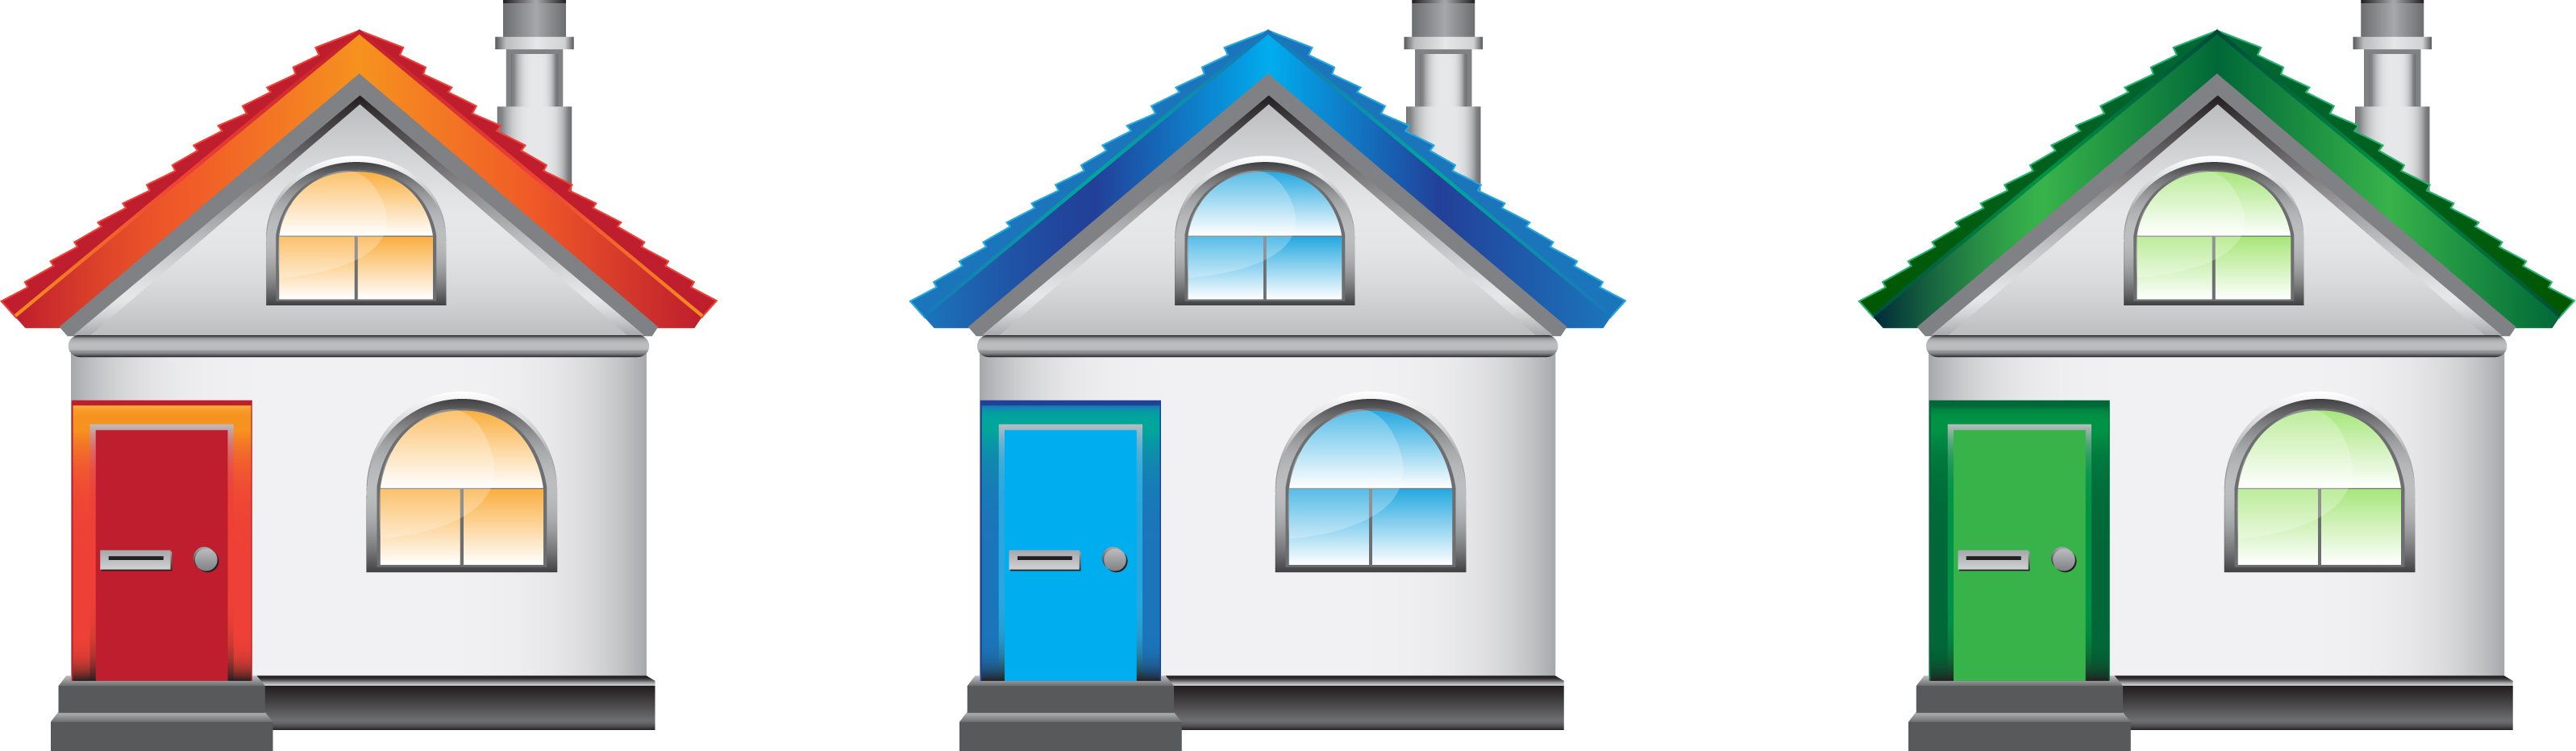 download house clipart - photo #44